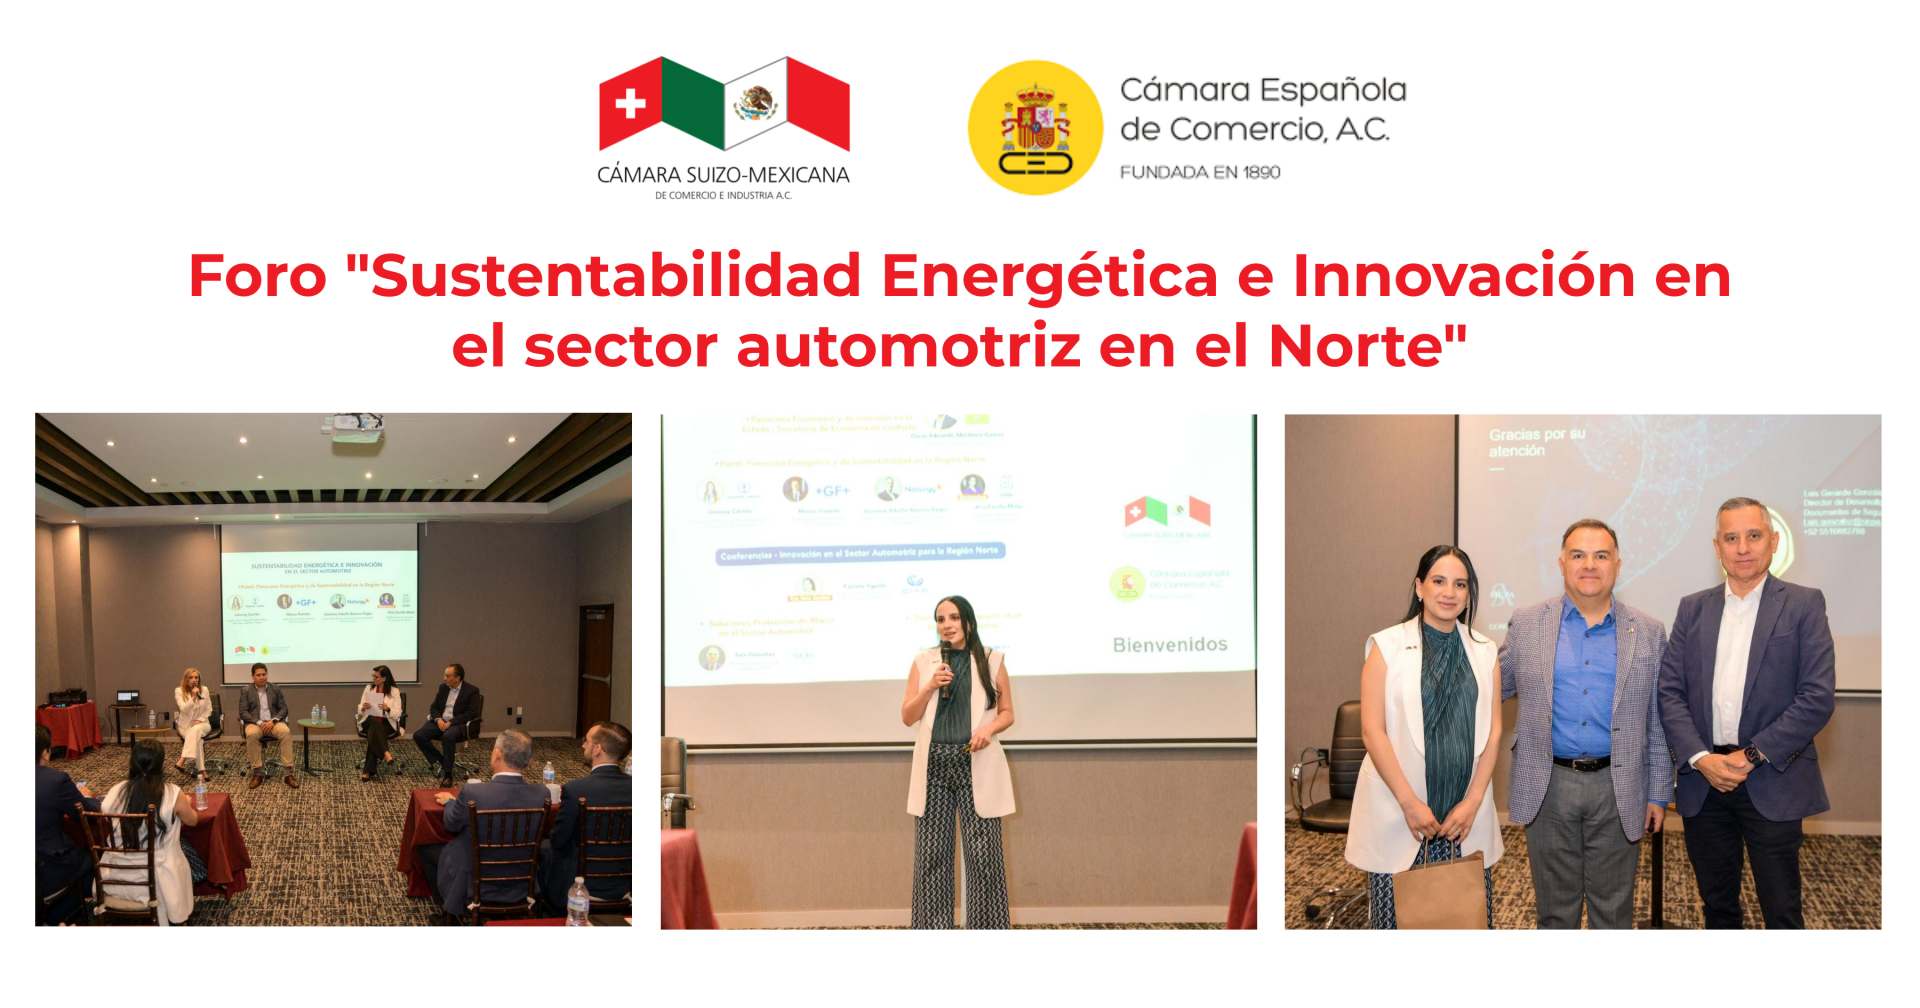 Forum “Energy Sustainability and Innovation in the Automotive Sector in the North”.